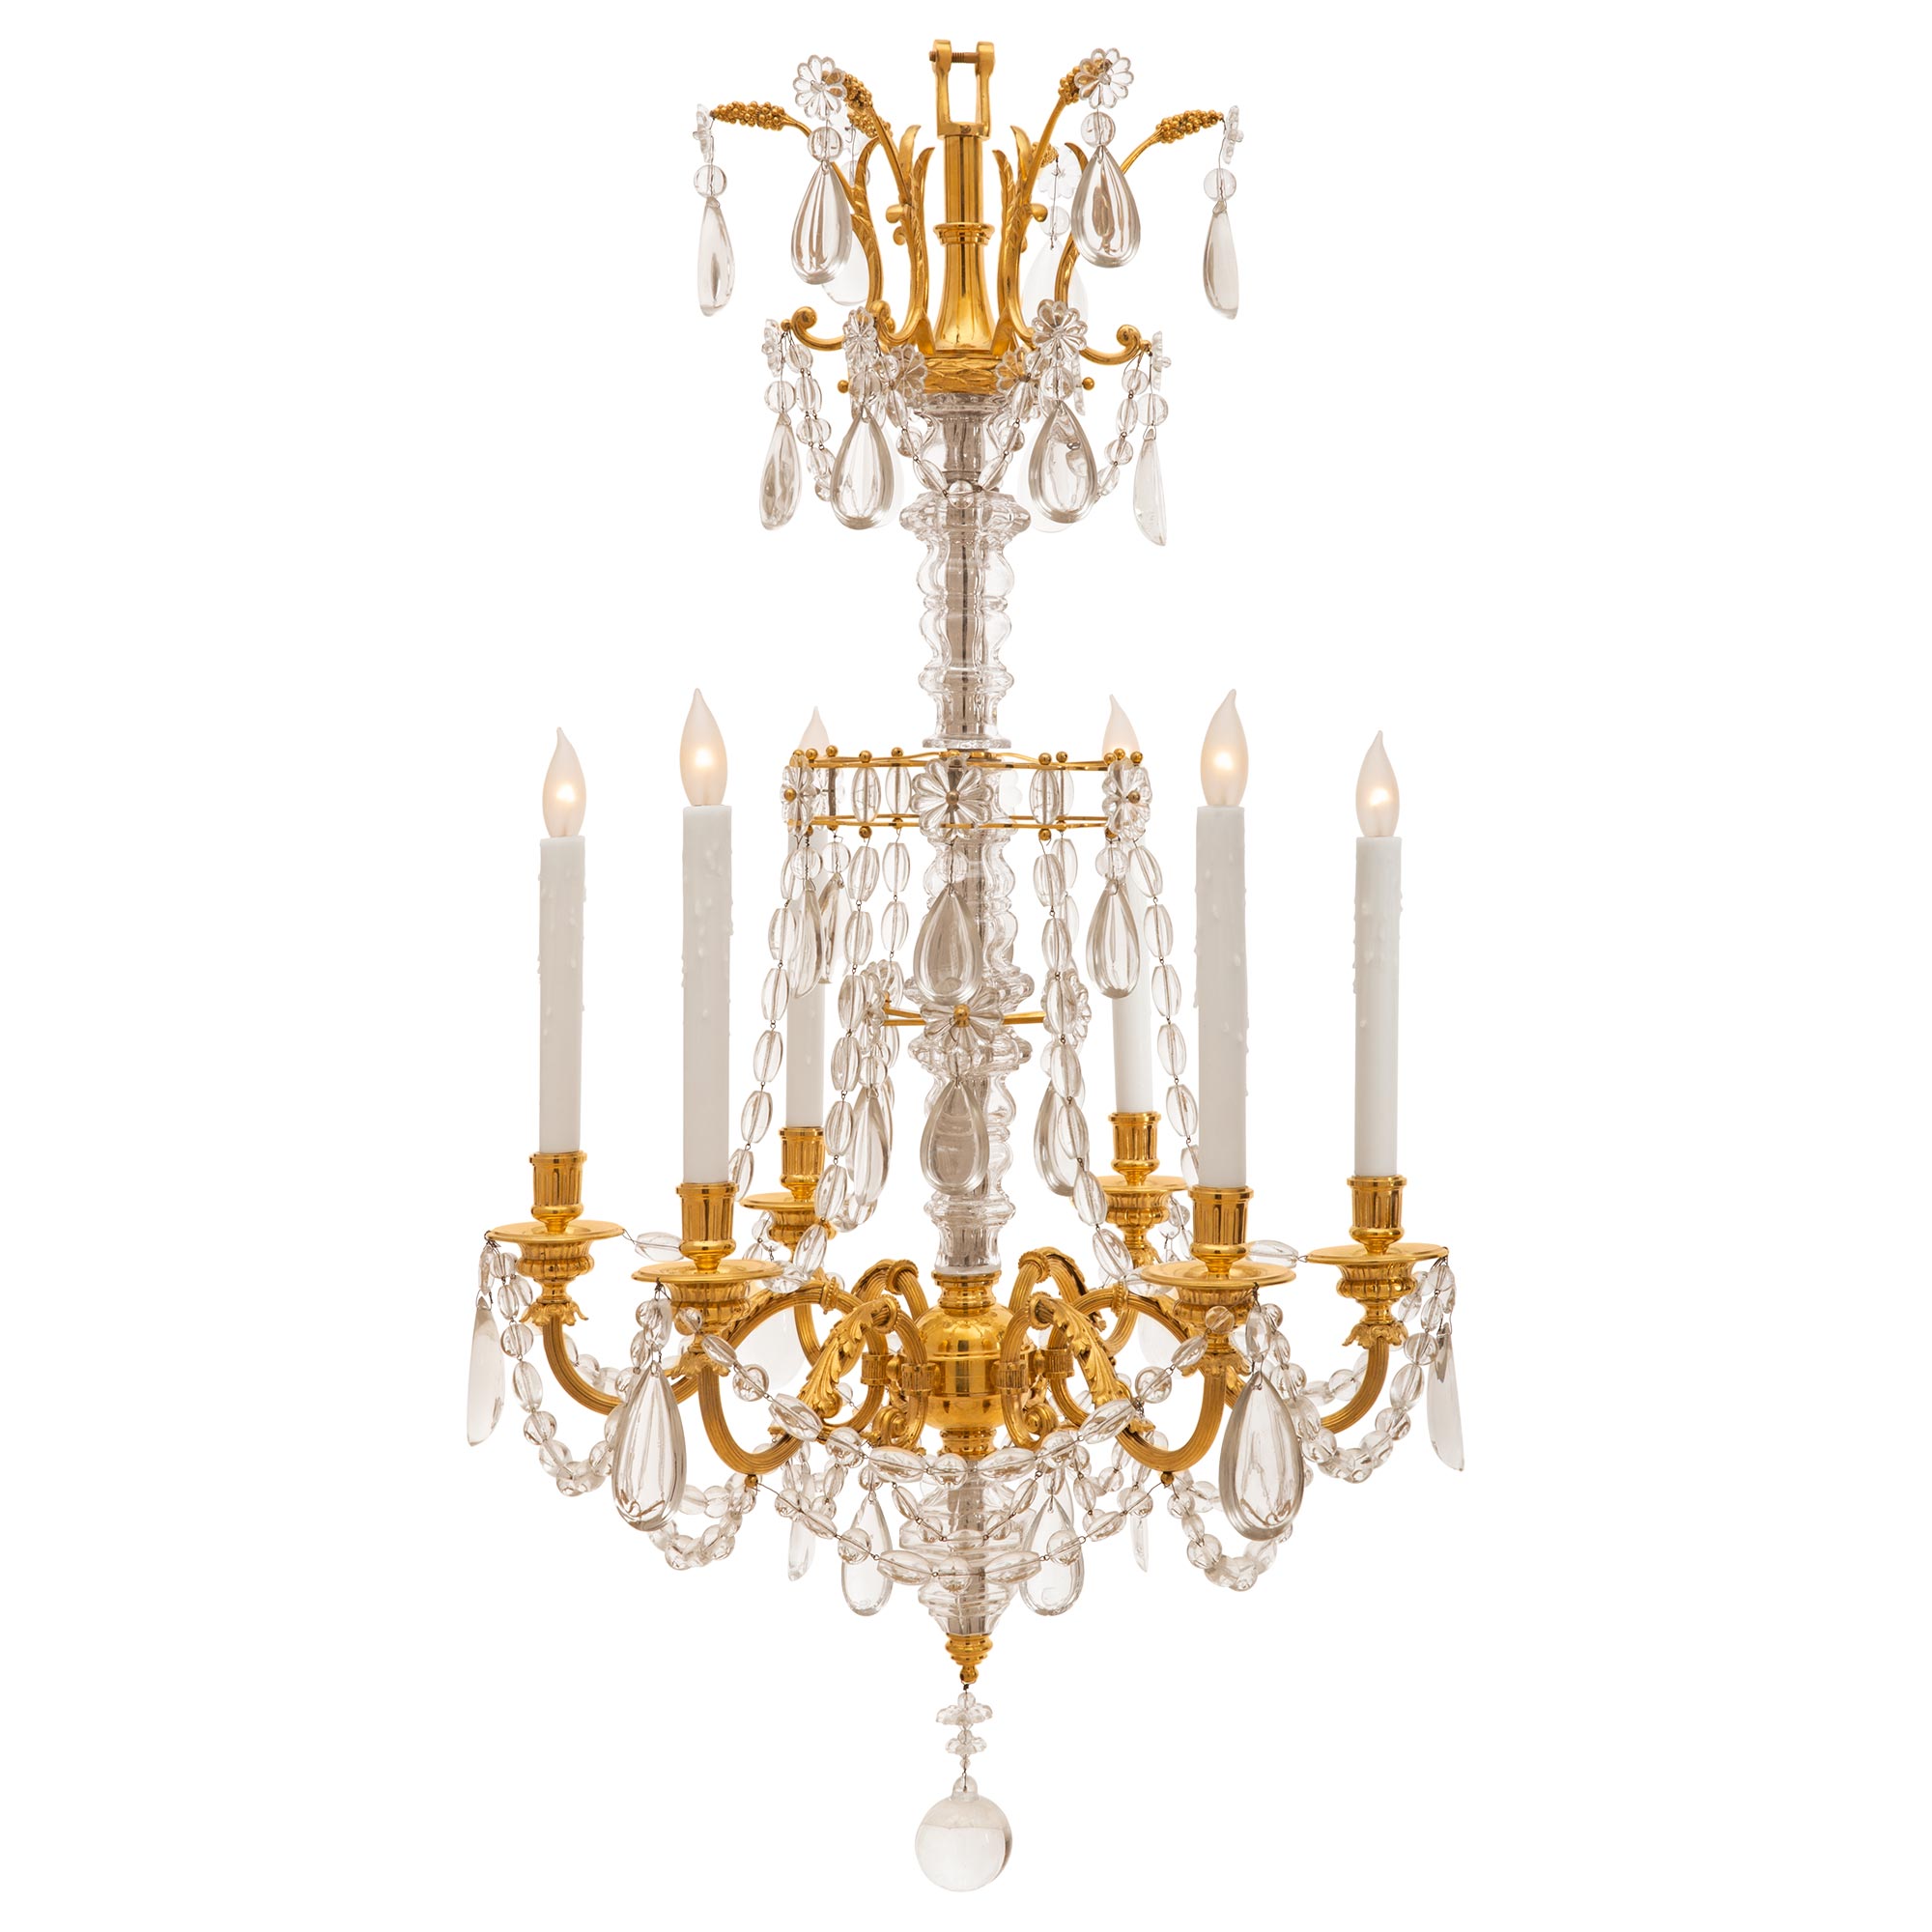 French Mid-19th Century Louis XVI Style Marie Antoinette Crystal Chandelier